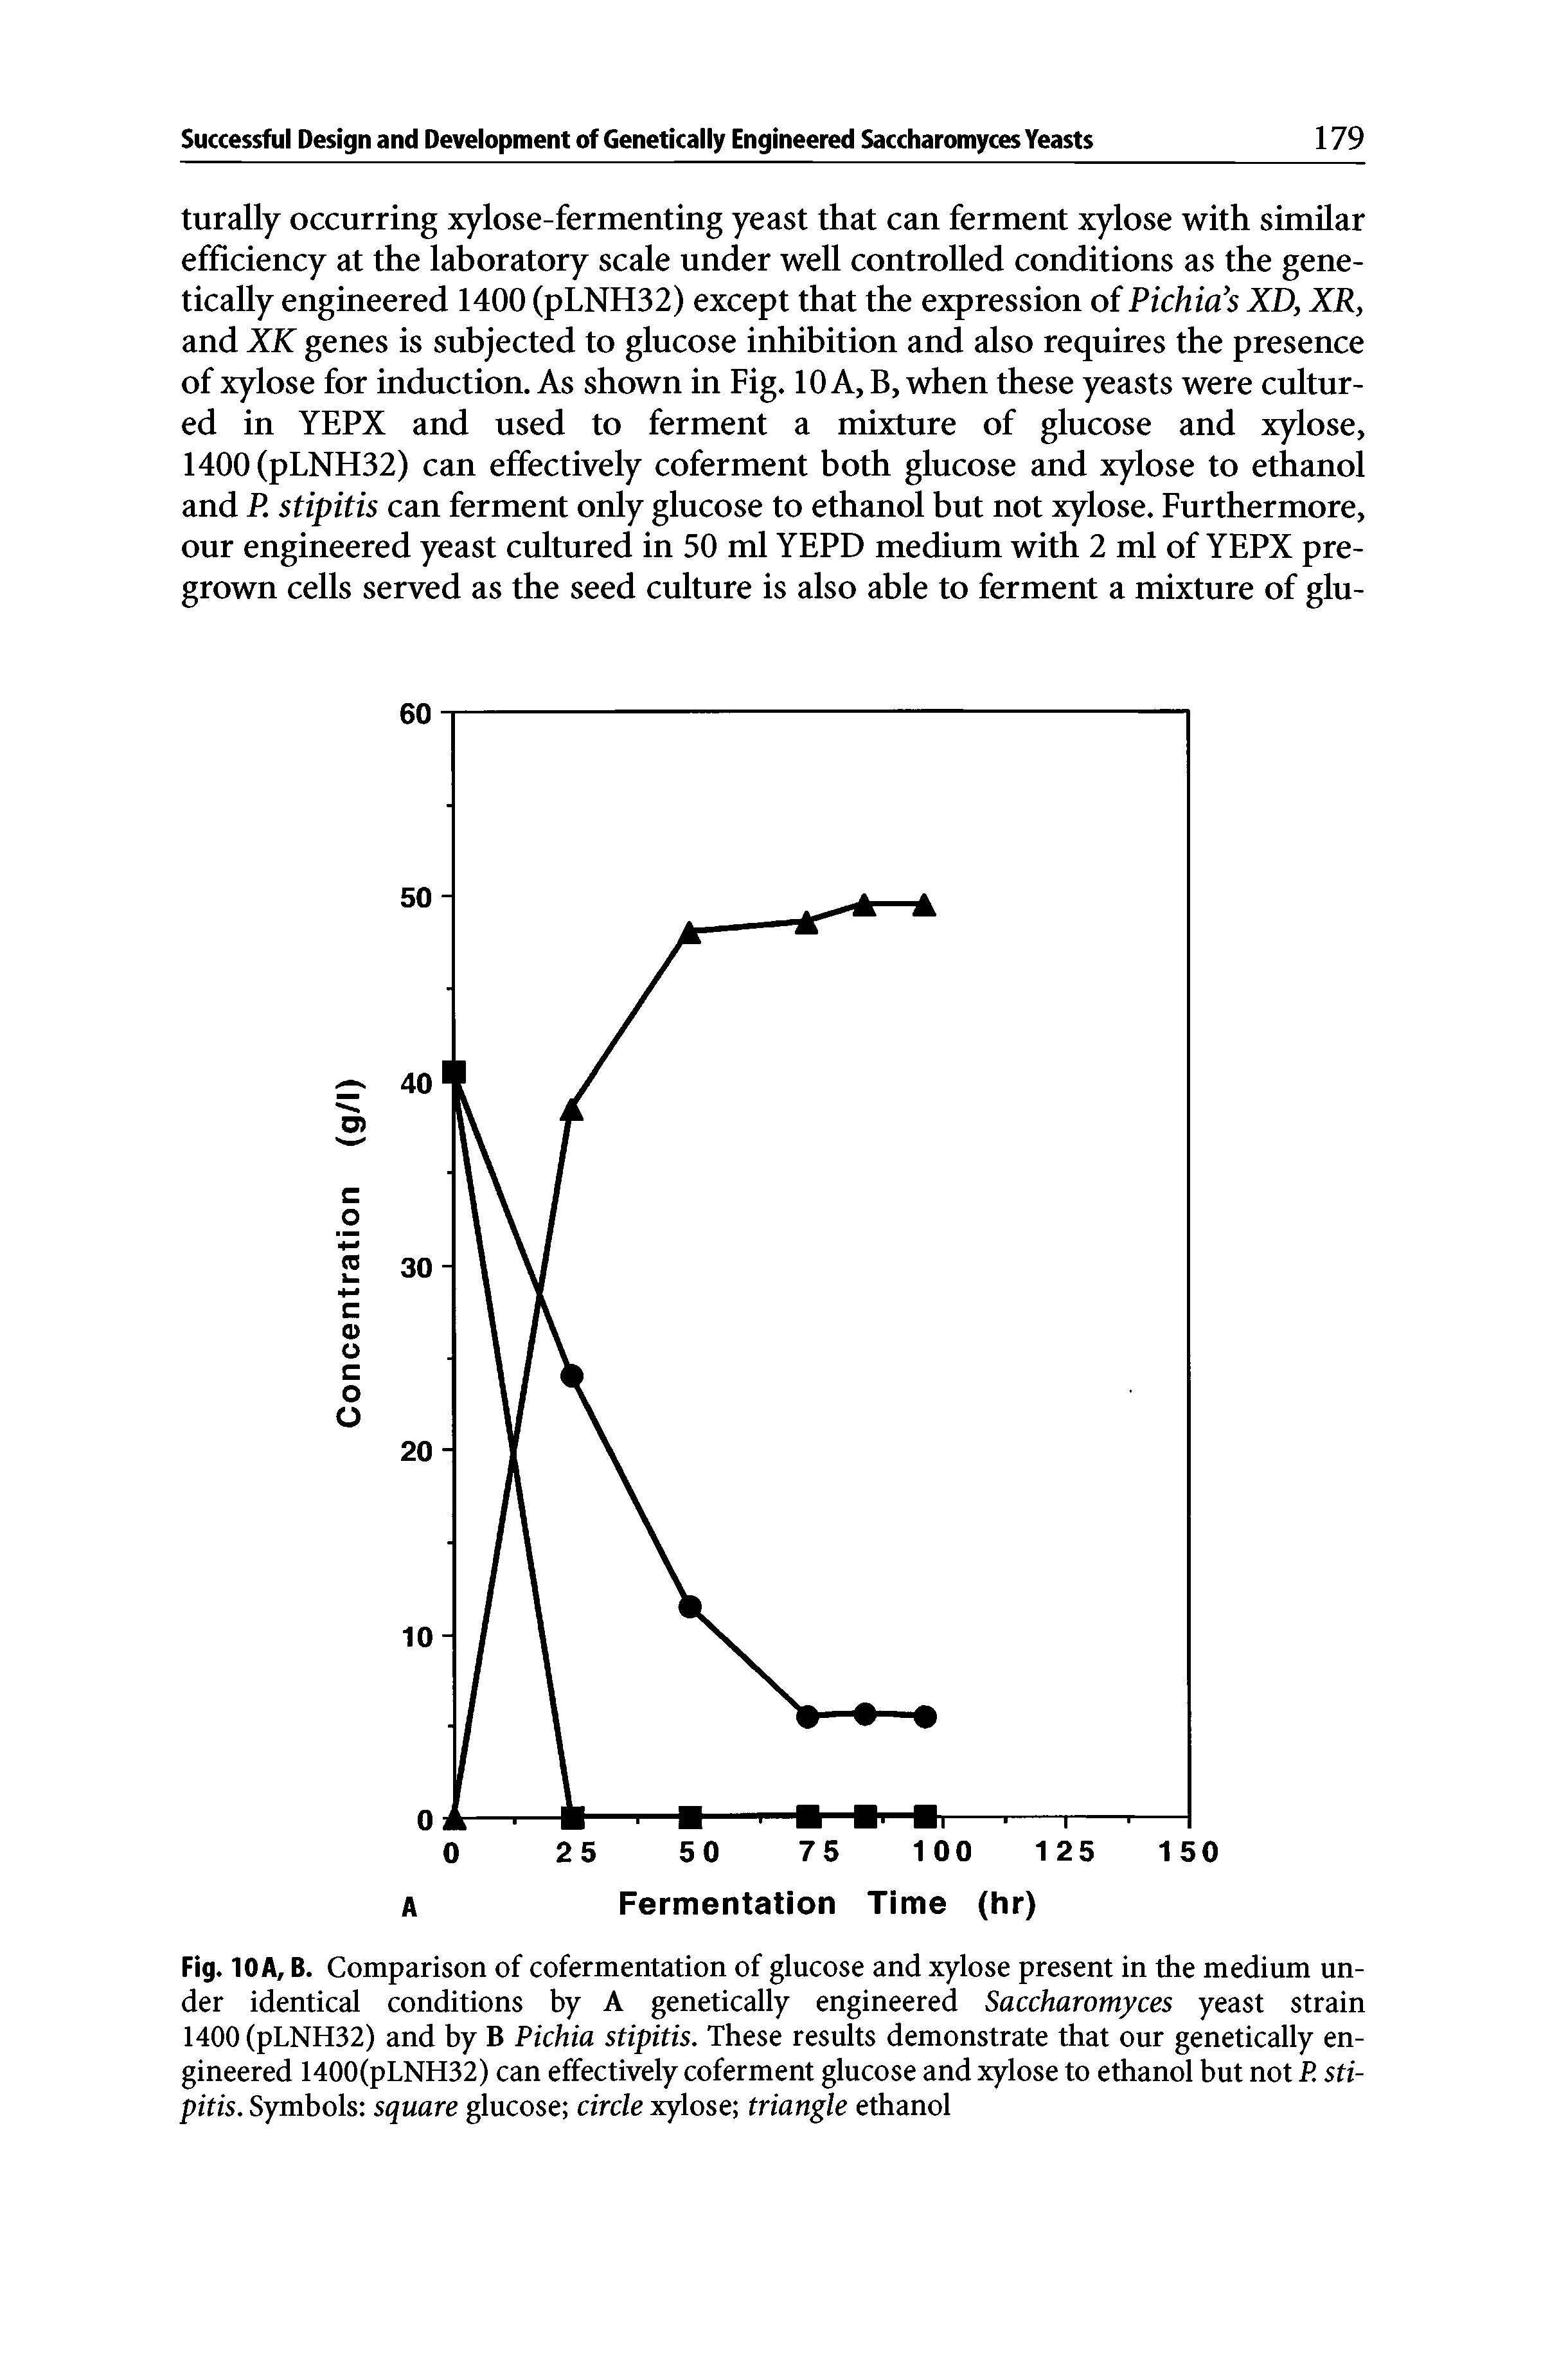 Fig. 10A, B. Comparison of cofermentation of glucose and xylose present in the medium under identical conditions by A genetically engineered Saccharomyces yeast strain 1400 (pLNH32) and by B Pichia stipitis. These results demonstrate that our genetically engineered 1400(pLNH32) can effectively coferment glucose and xylose to ethanol but not P. stipitis. Symbols square glucose circle xylose triangle ethanol...